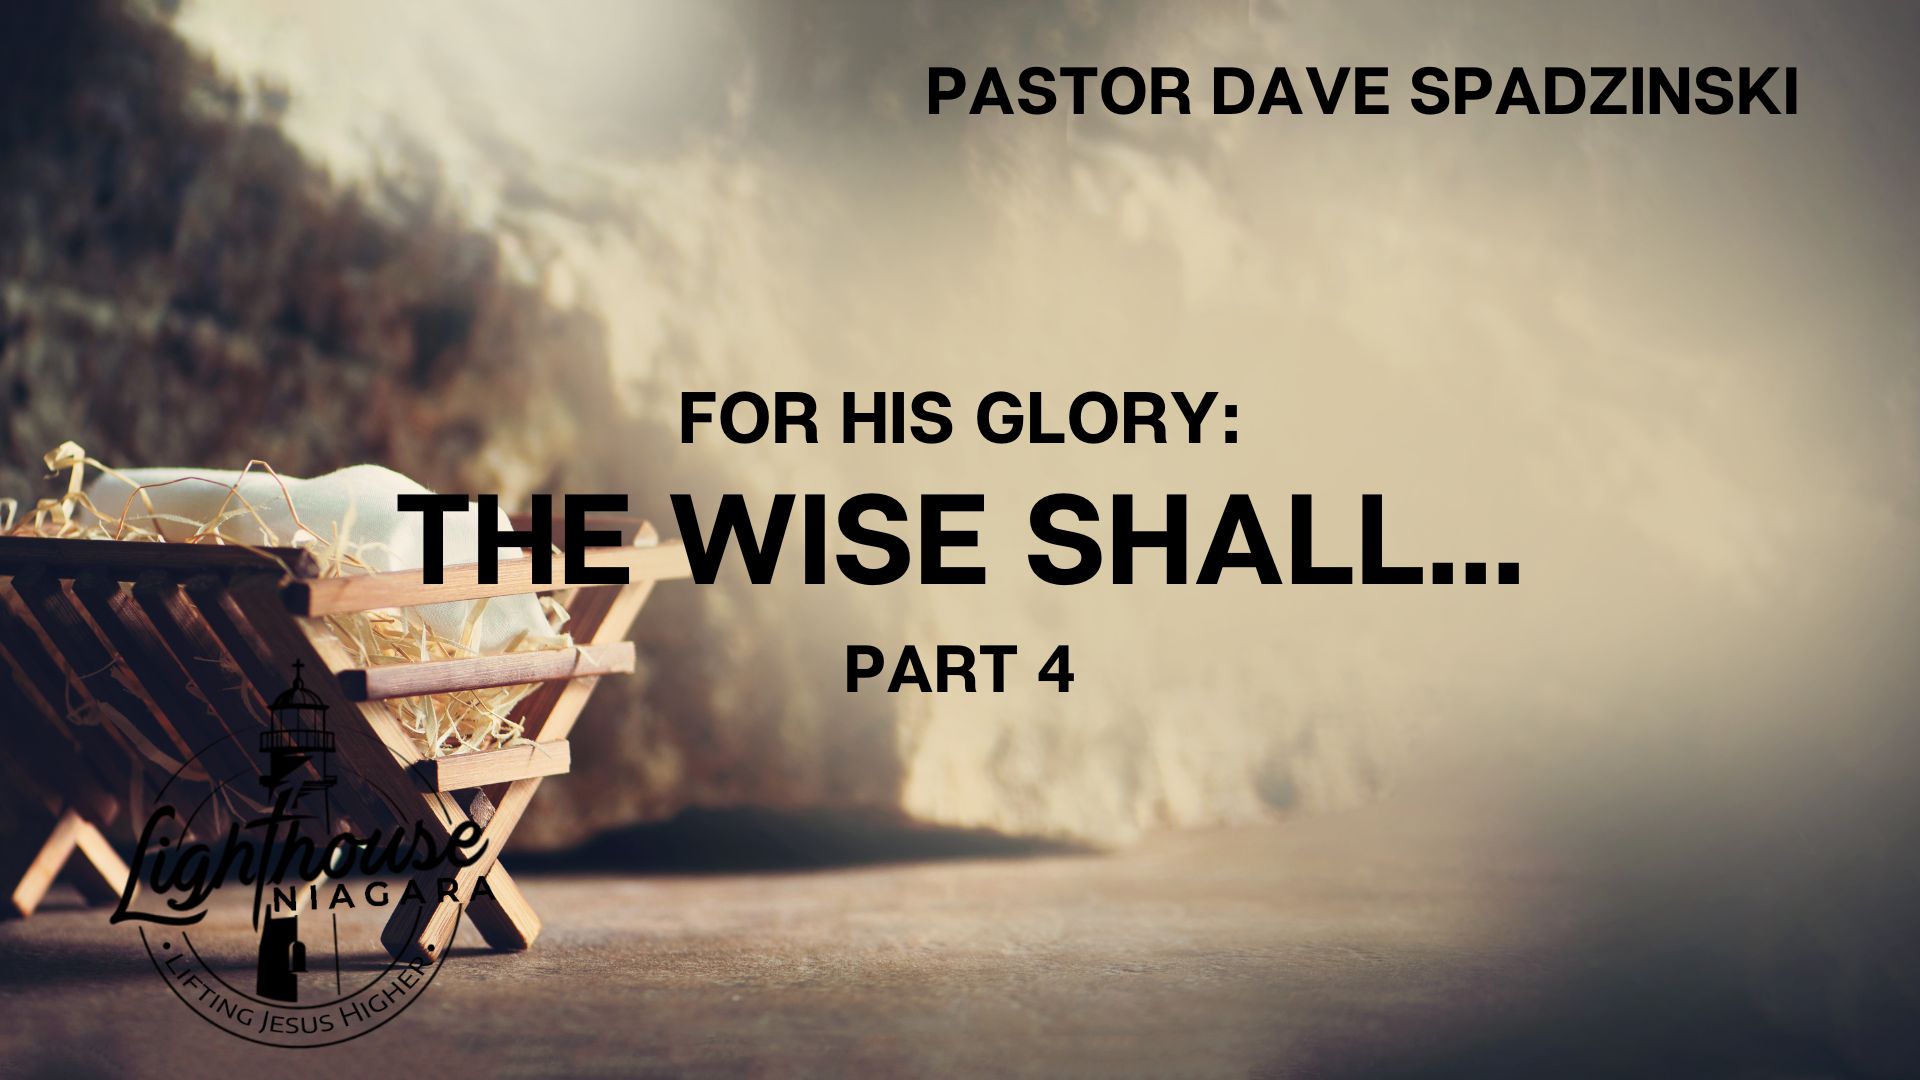 For His Glory: The Wise Shall... - Pastor Dave Spadzinski